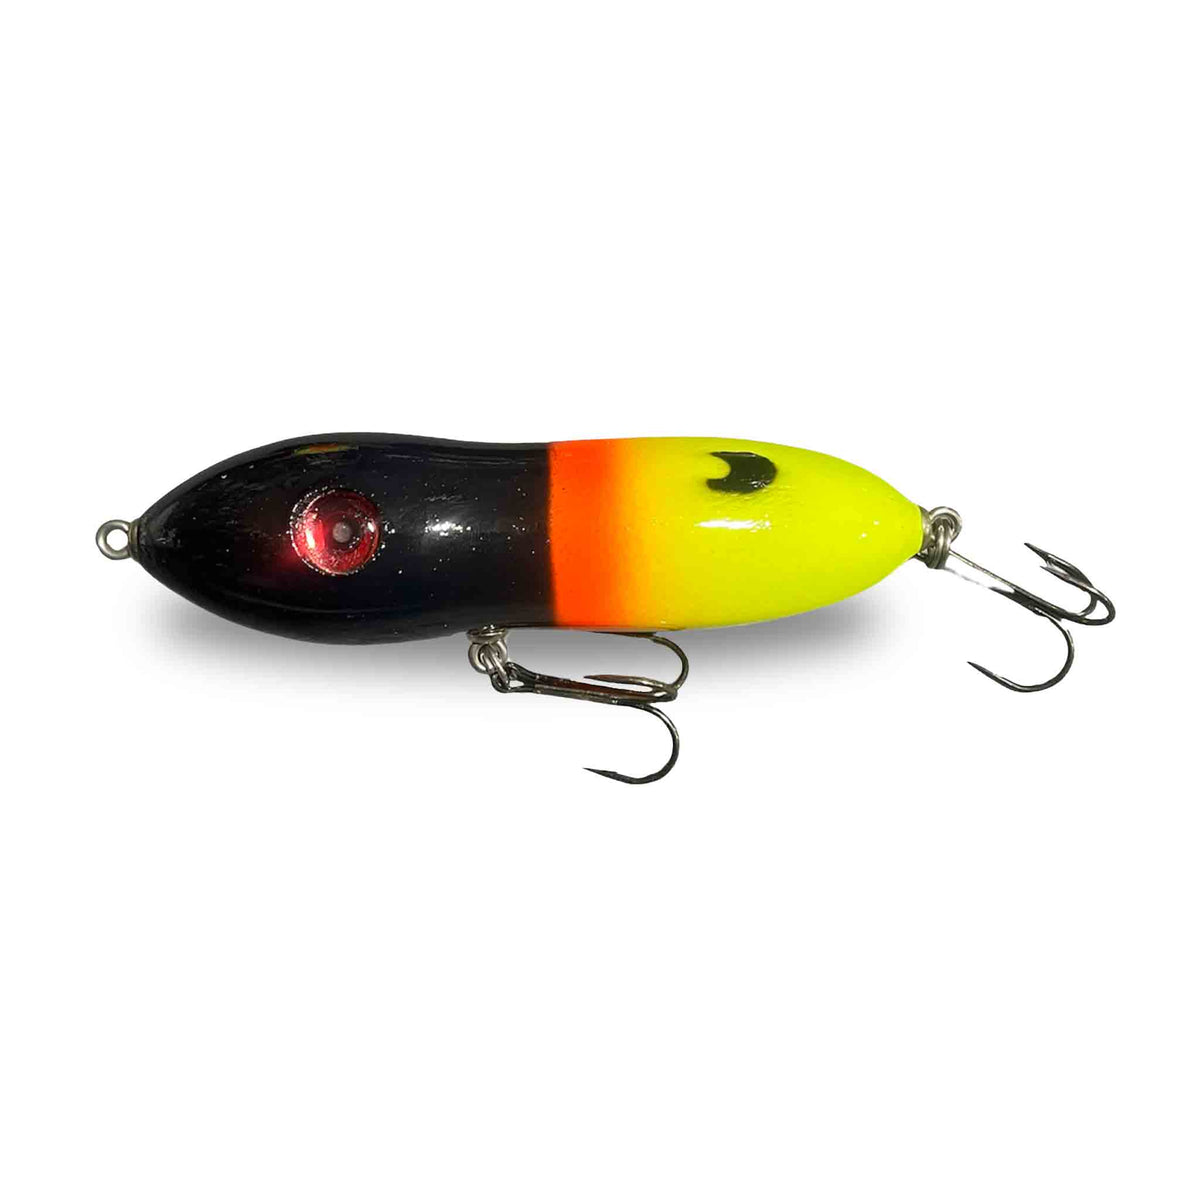 Pike Fishing Lures - Top Water Baits  Fishing Tackle Store Canada – Tagged  Brand_SPRO